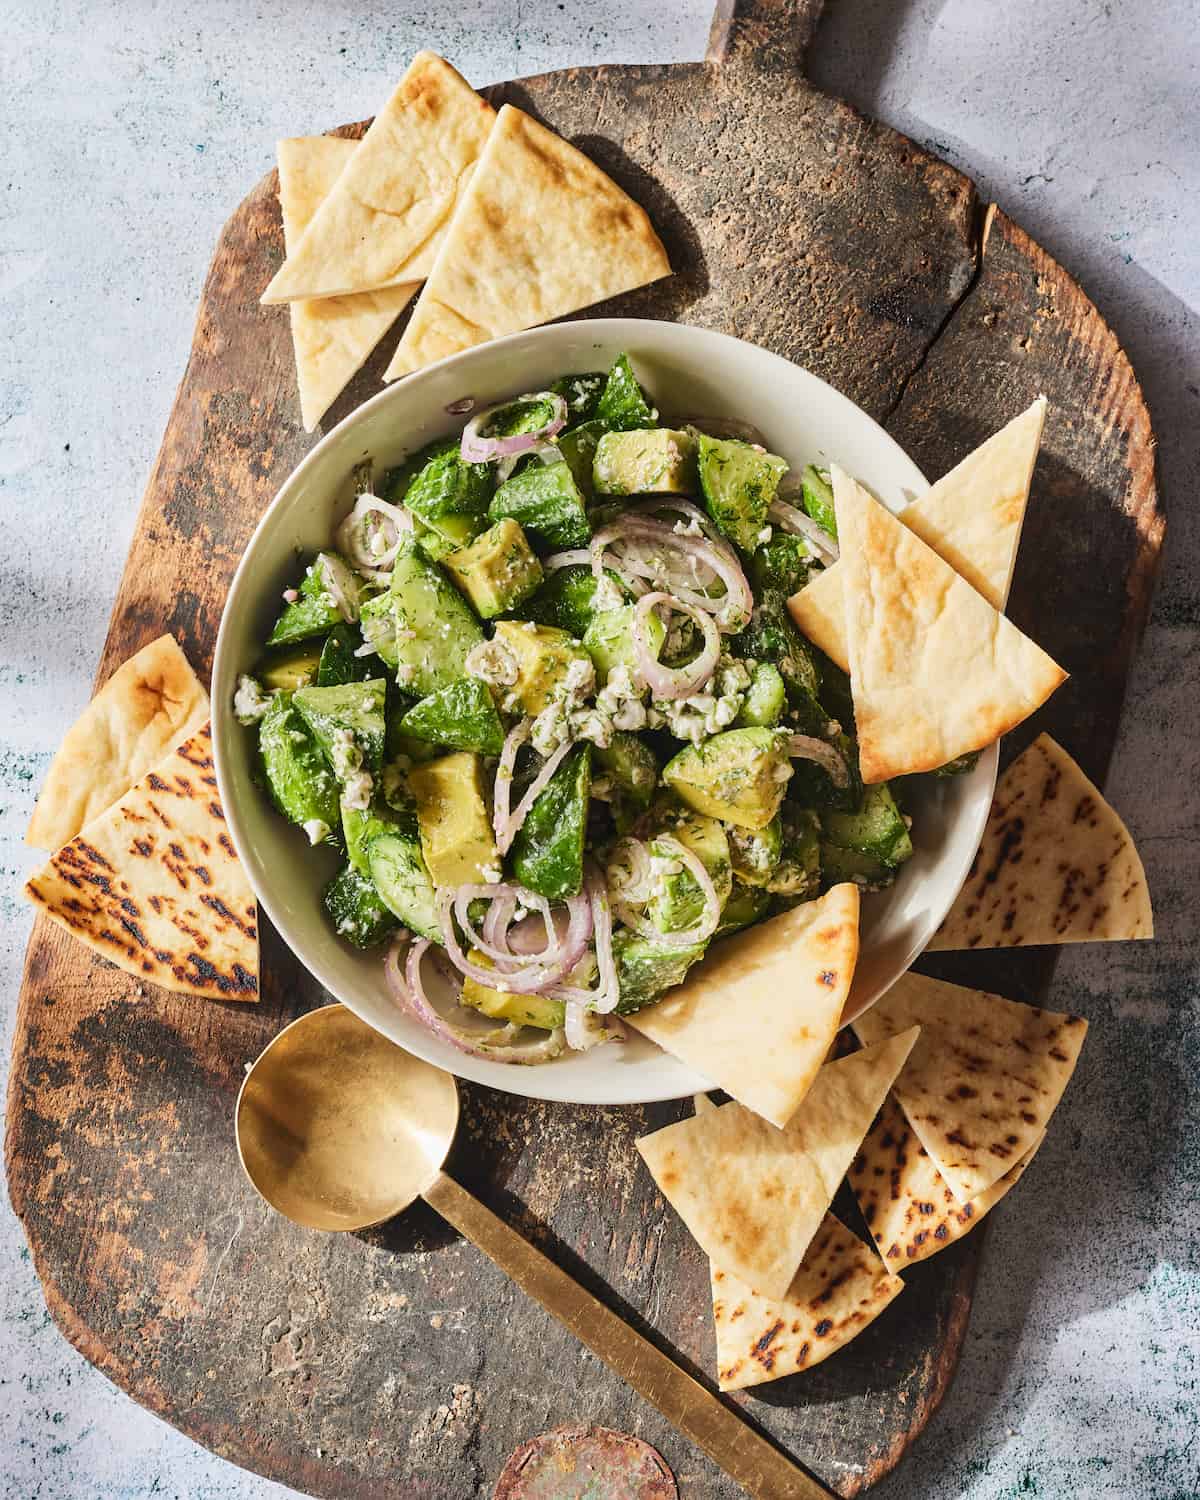 A wooden board with a white bowl of cucumber avocado feta salad garnished with sliced shallots, with pita chips and a gold spoon on the side.